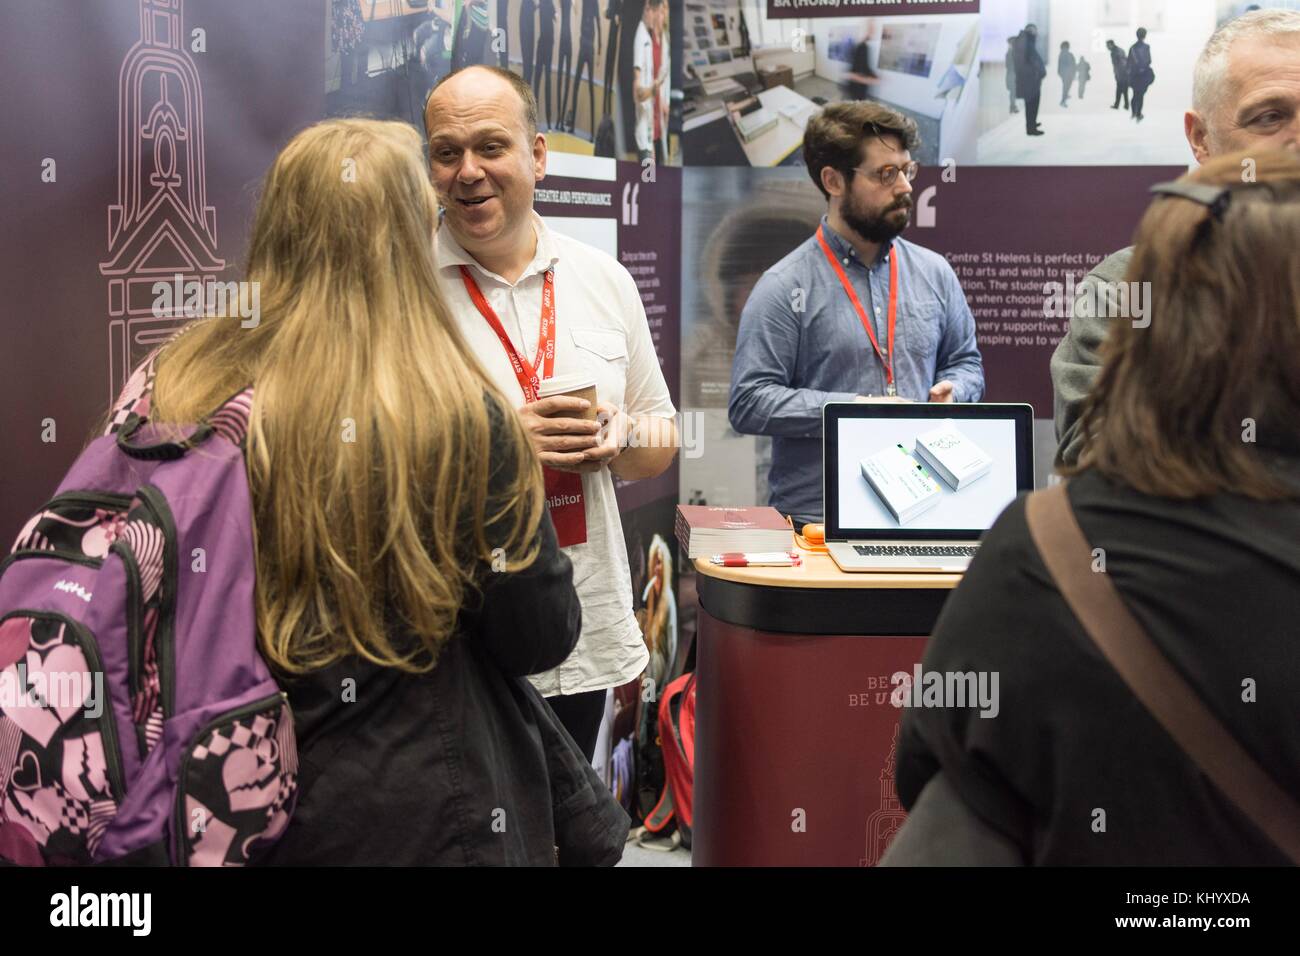 Manchester, UK. 22nd November 2017. UCAS Higher Education Event. Manchester Central Convention Complex.  Thousands of prospective students from across the country attend day of the annual Creative Arts UCAS H.E. event to discuss options with the various Universities and Colleges that are exhibiting. Stock Photo